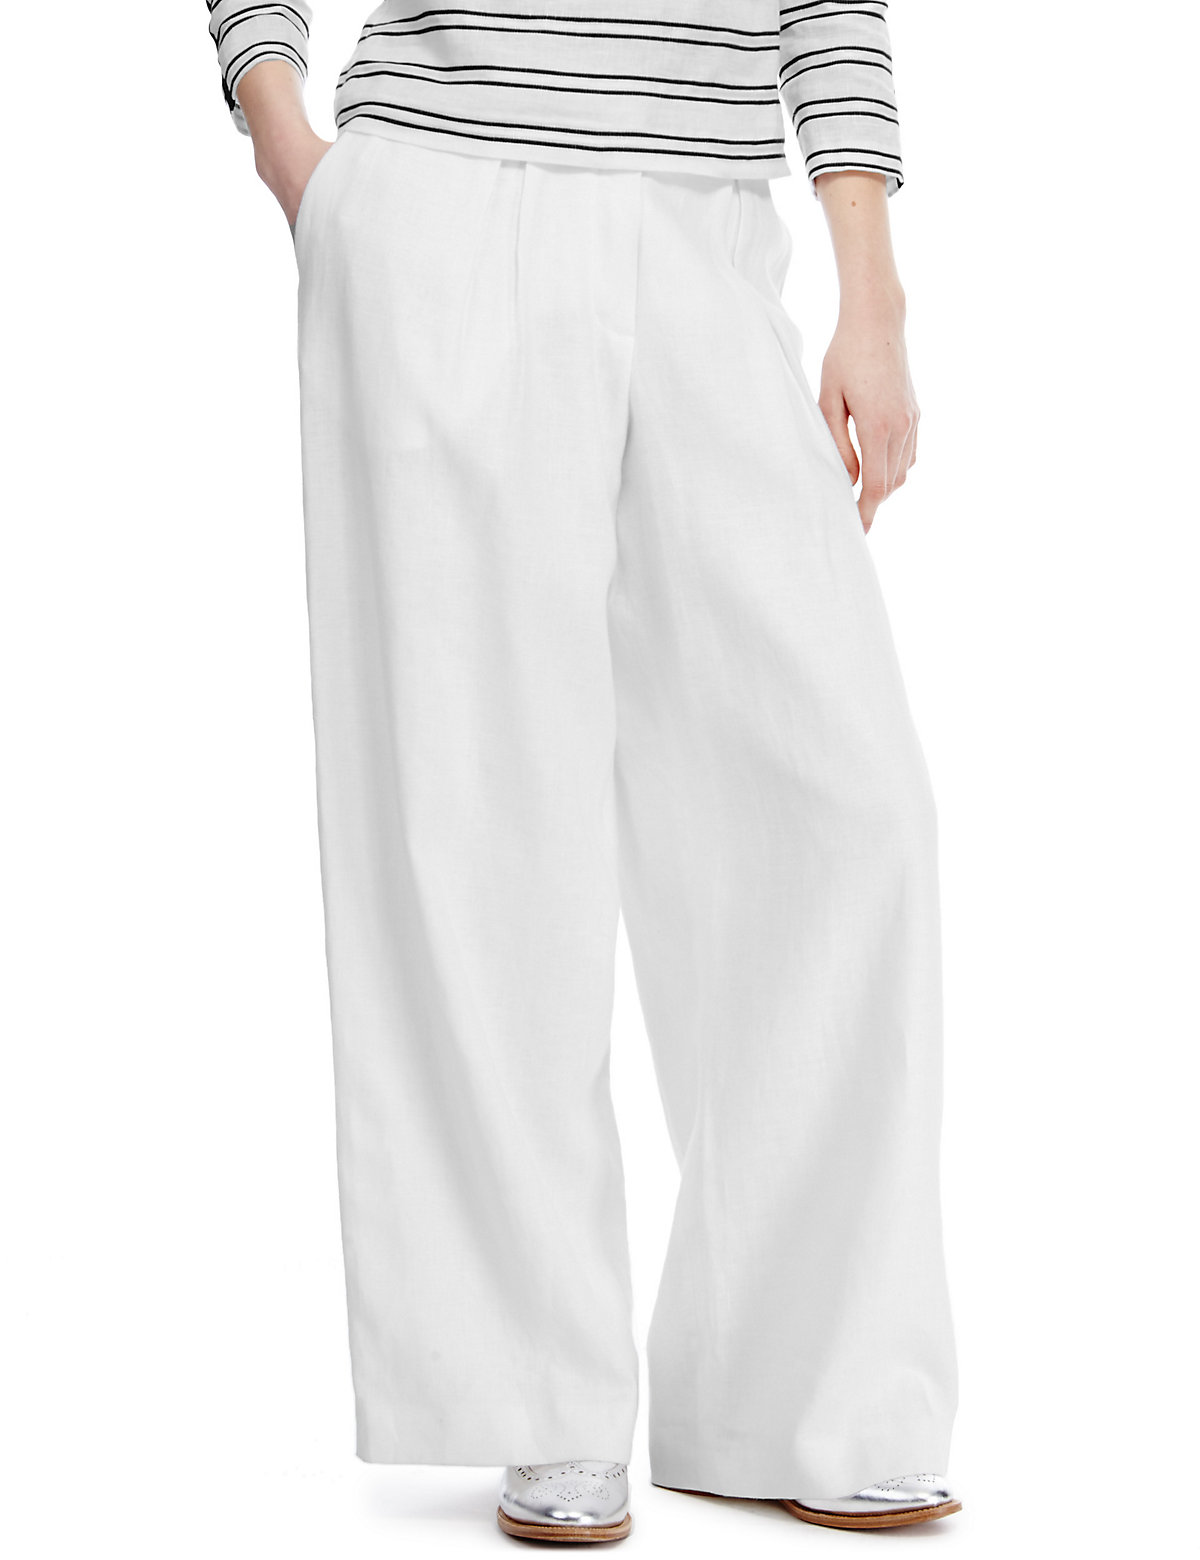 Ladies Wide Leg Trousers, Evening, Stretch, Mother of the Bride Outfits